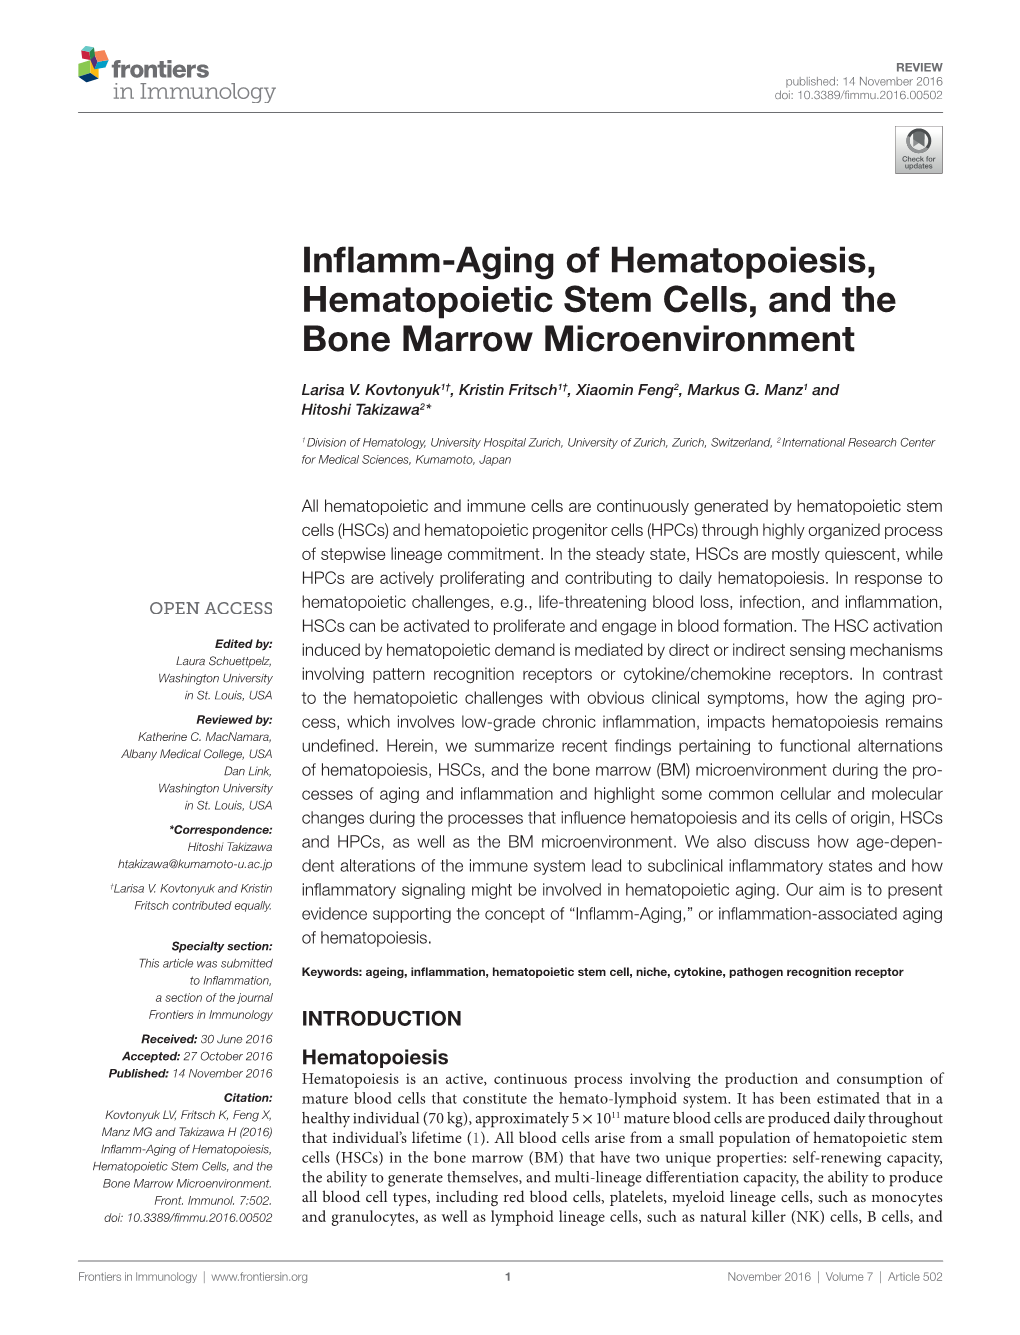 Inflamm-Aging of Hematopoiesis, Hematopoietic Stem Cells, and the Bone Marrow Microenvironment